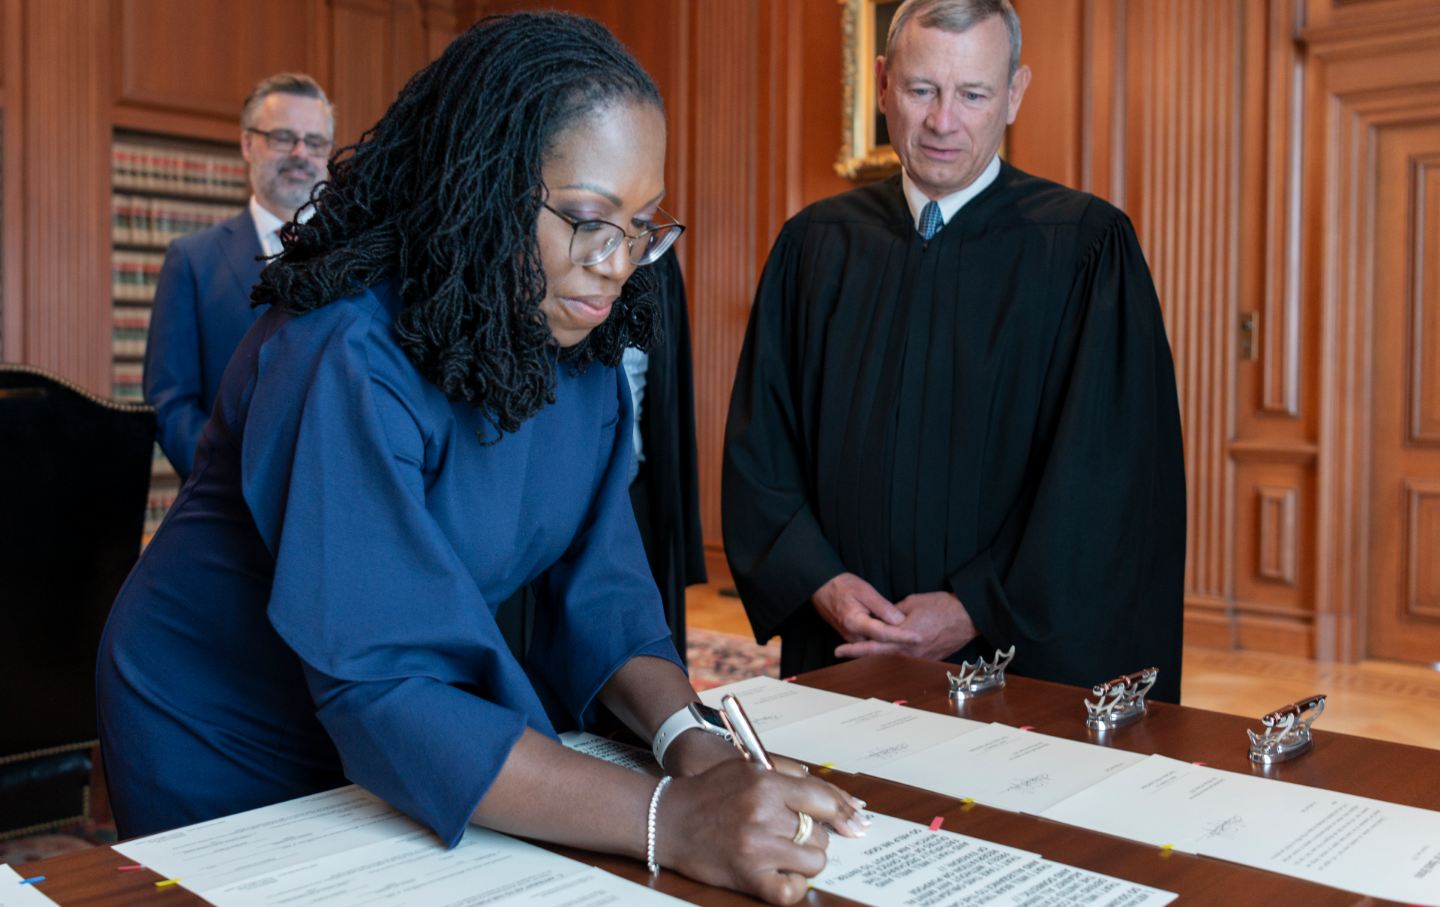 A woman signs a document as a man in judicial robes watches.